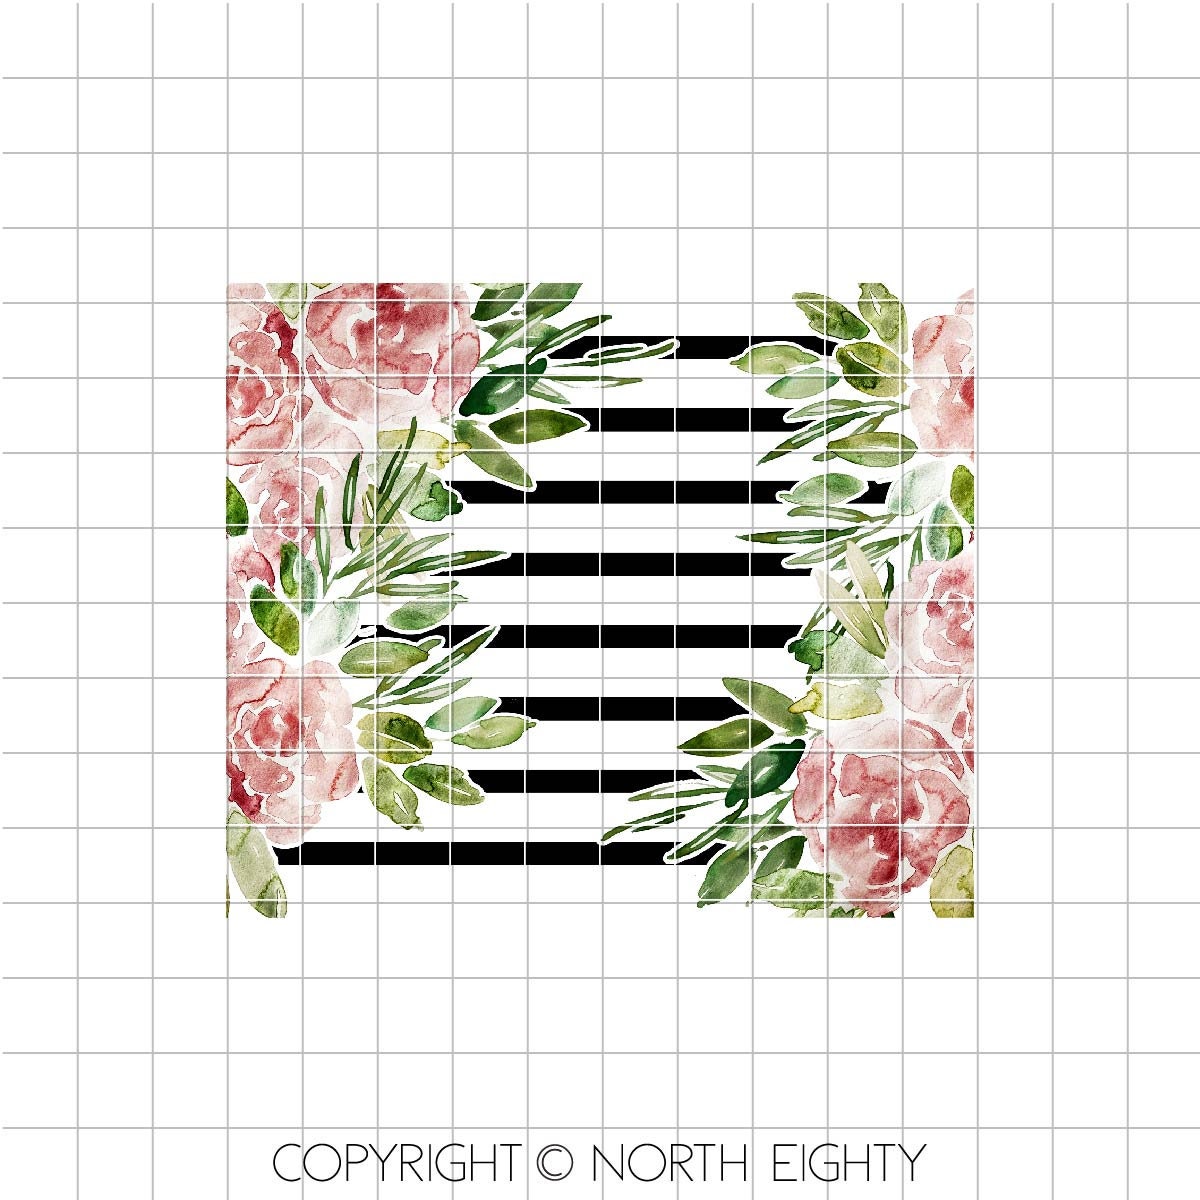 Skinny Tumbler png - 20 oz Sublimation Digital Download - Watercolor Floral - Flowers and Stripes